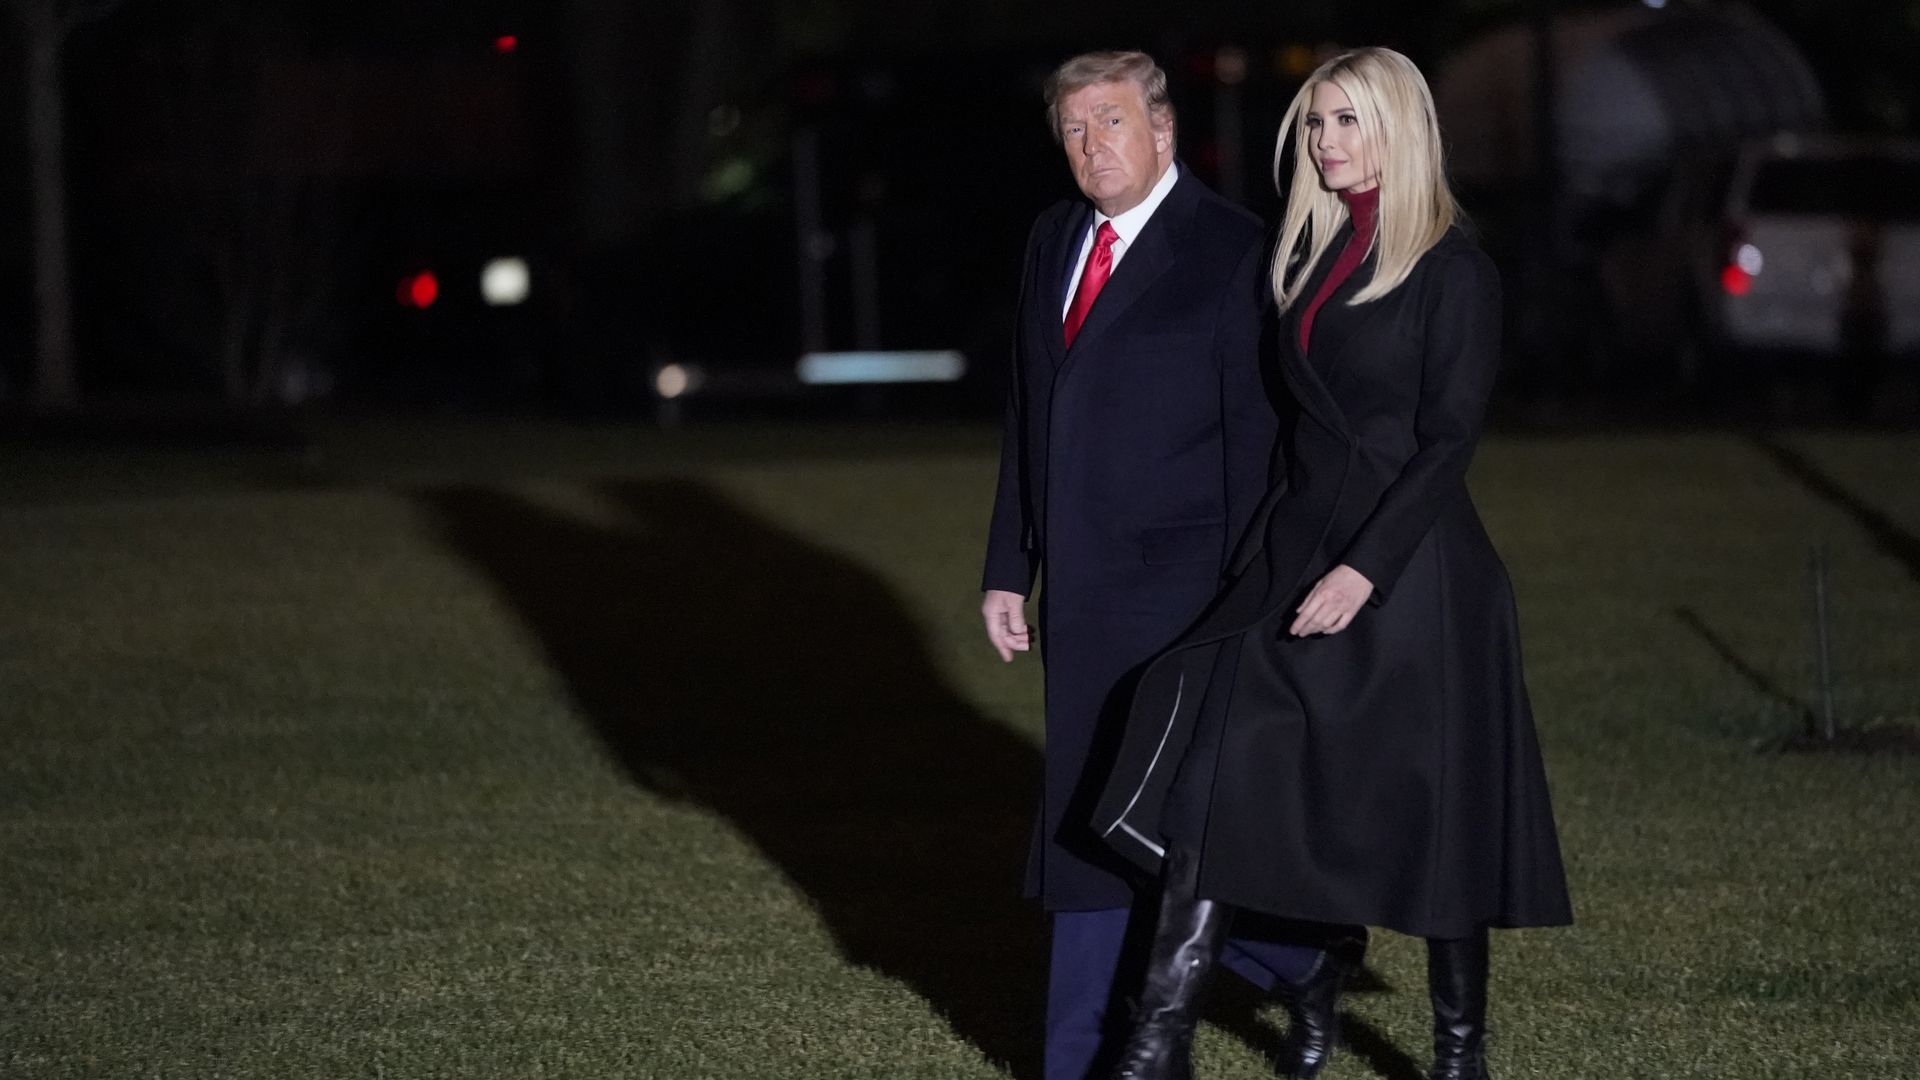 U.S. President Donald Trump and daughter Ivanka Trump walk to Marine One on the South Lawn of the White House on January 4, 2020 in Washington, DC.